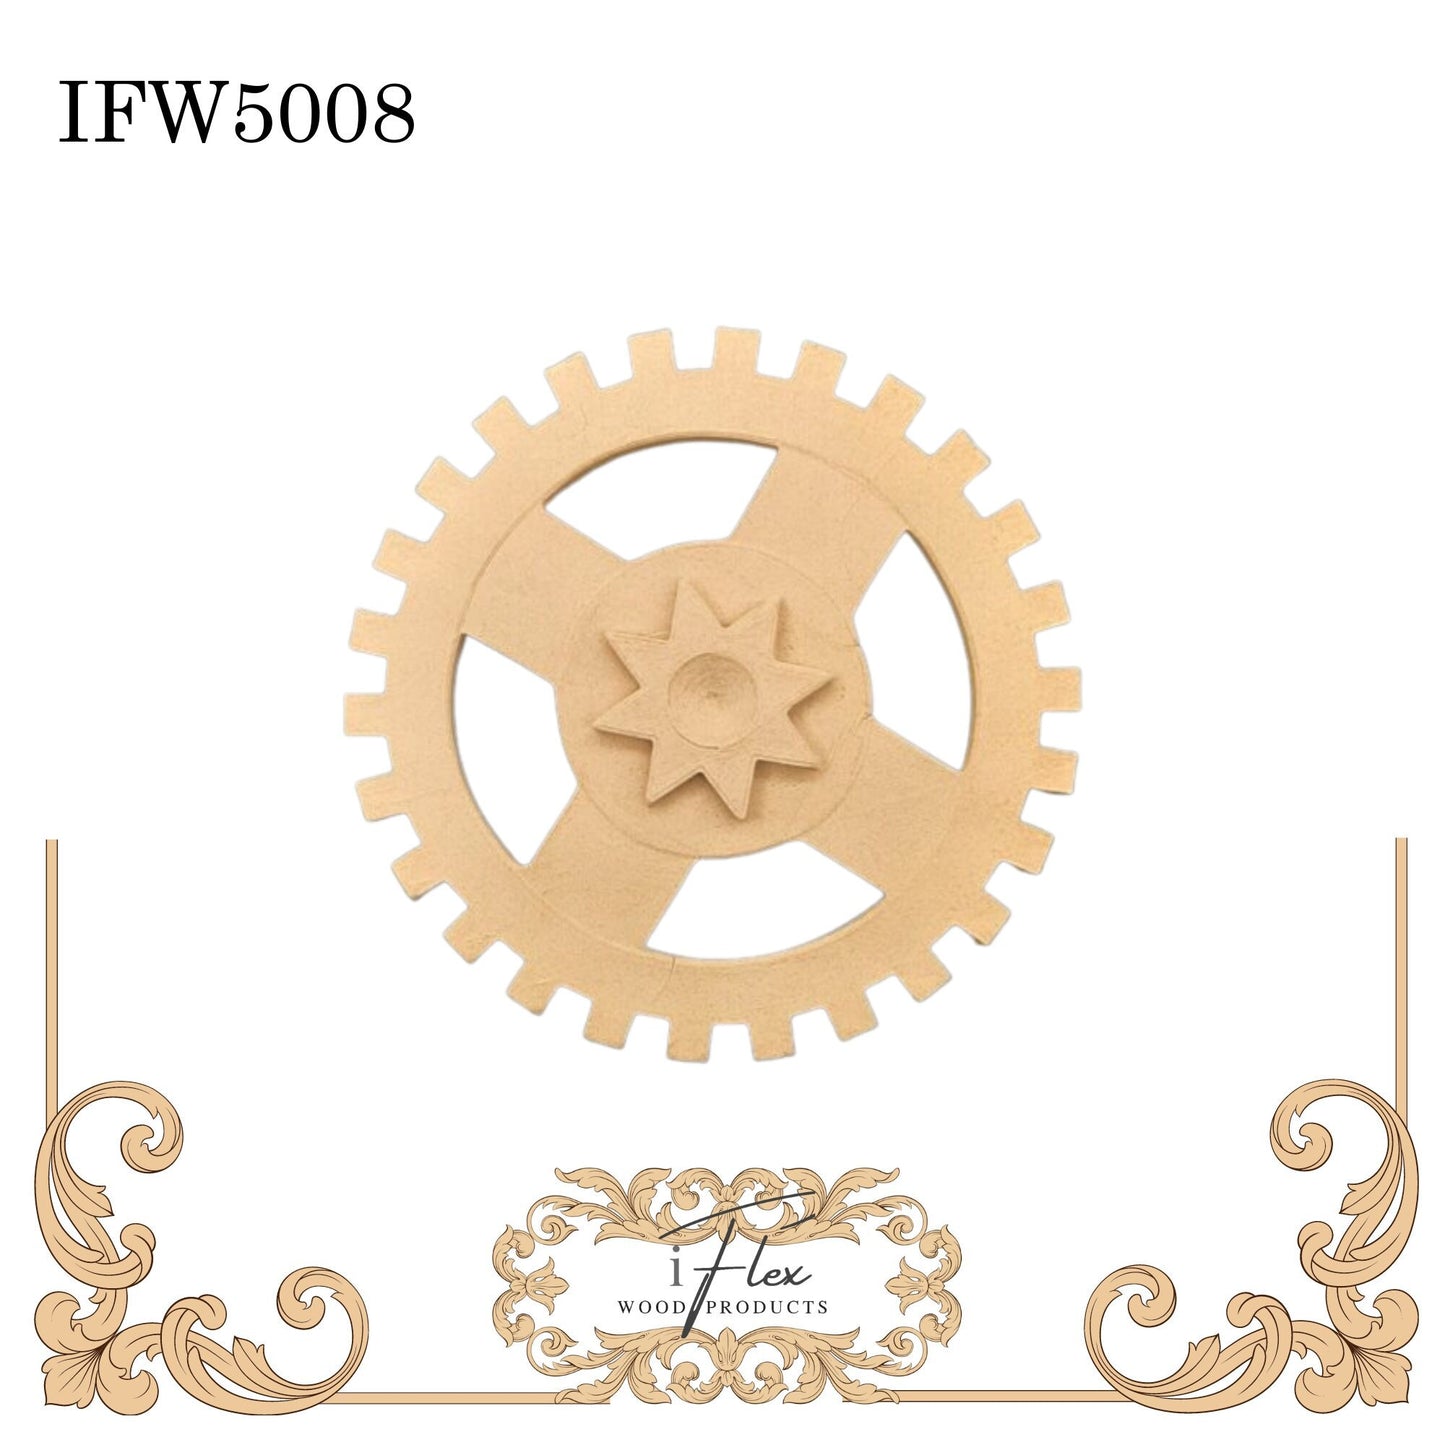 IFW 5008 iFlex Wood Products Flexible Pliable Embellishment gears